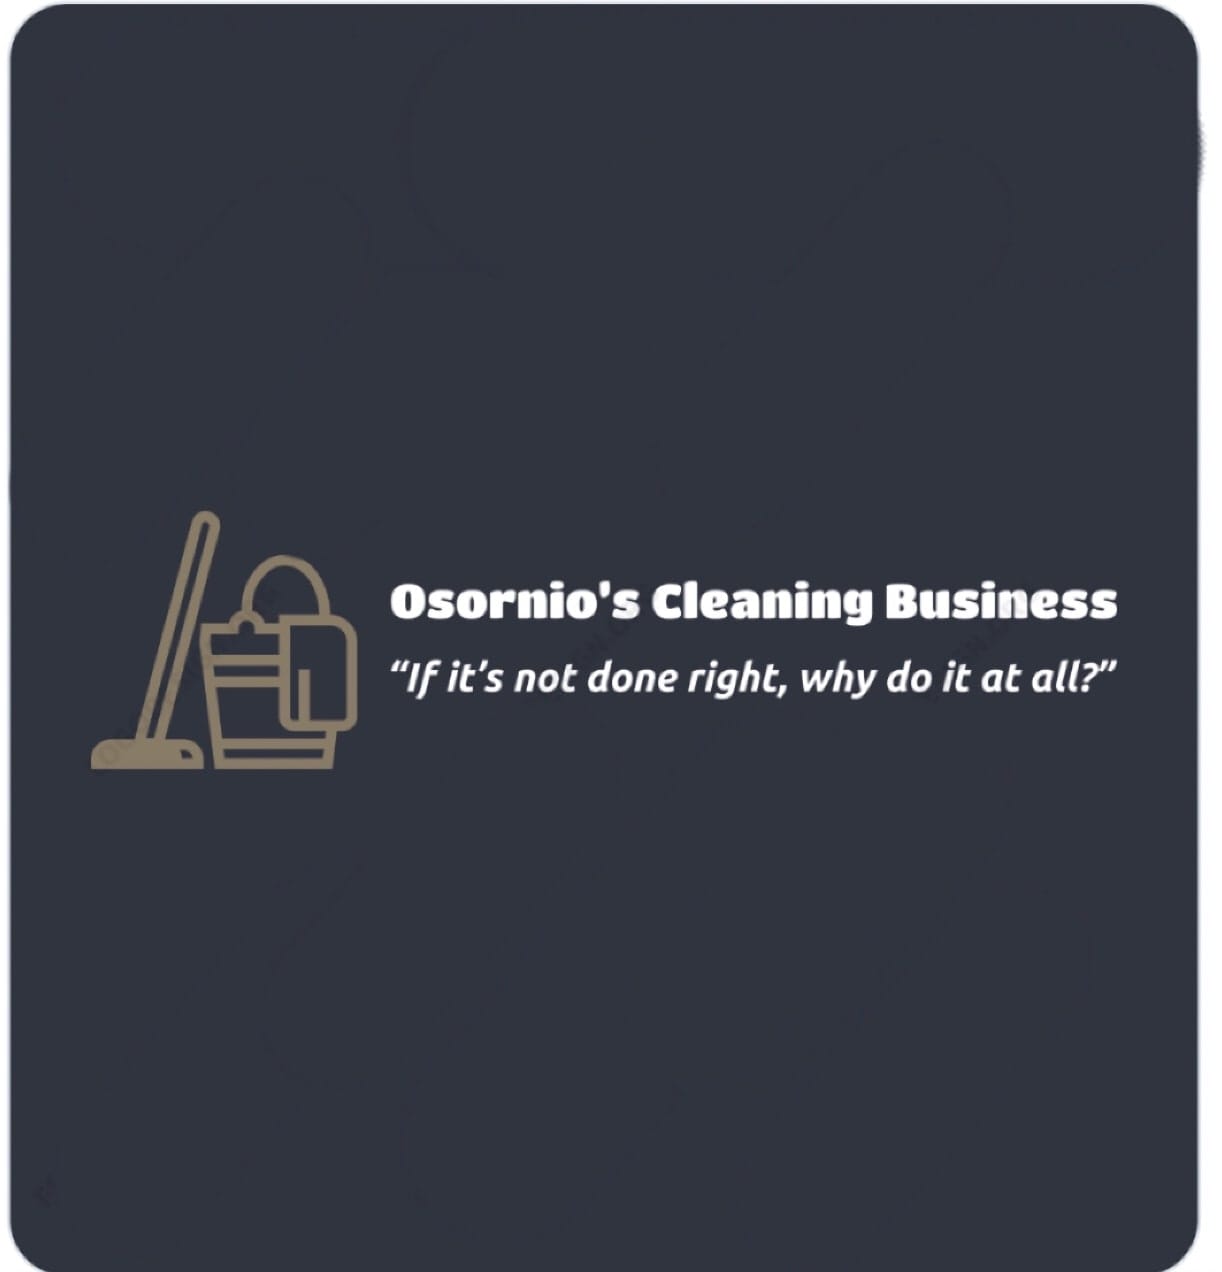 Osornio’s Cleaning Business